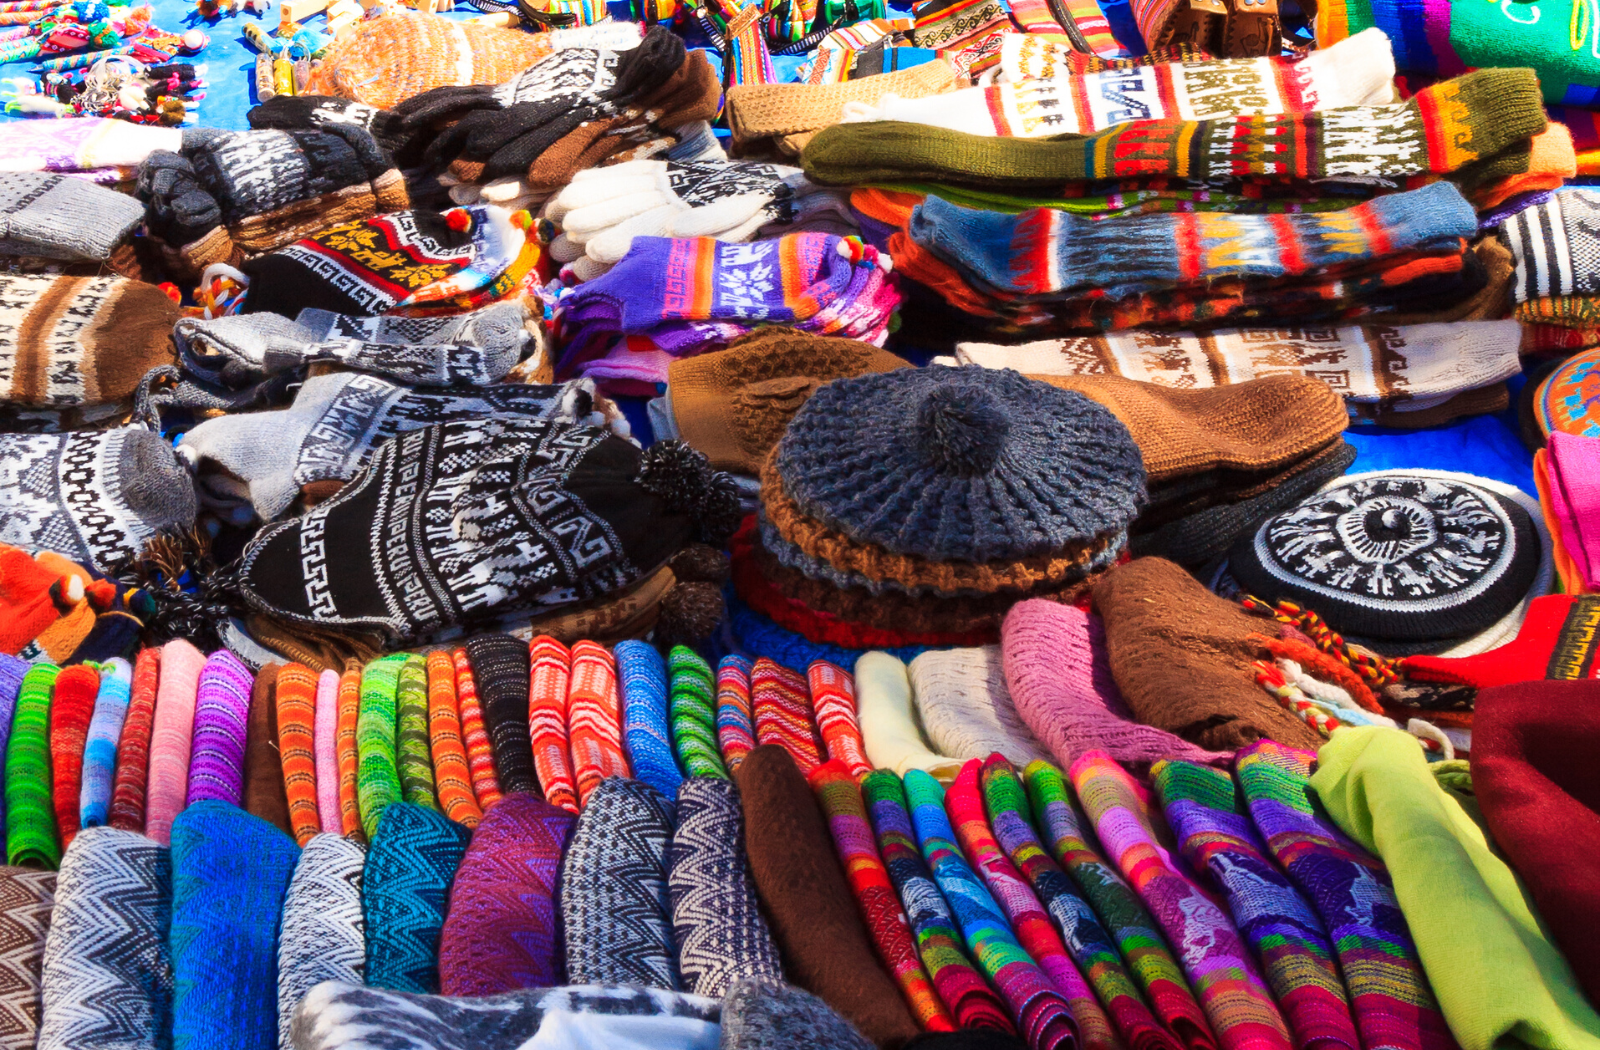 Traditional gifts at a market in Bolivia